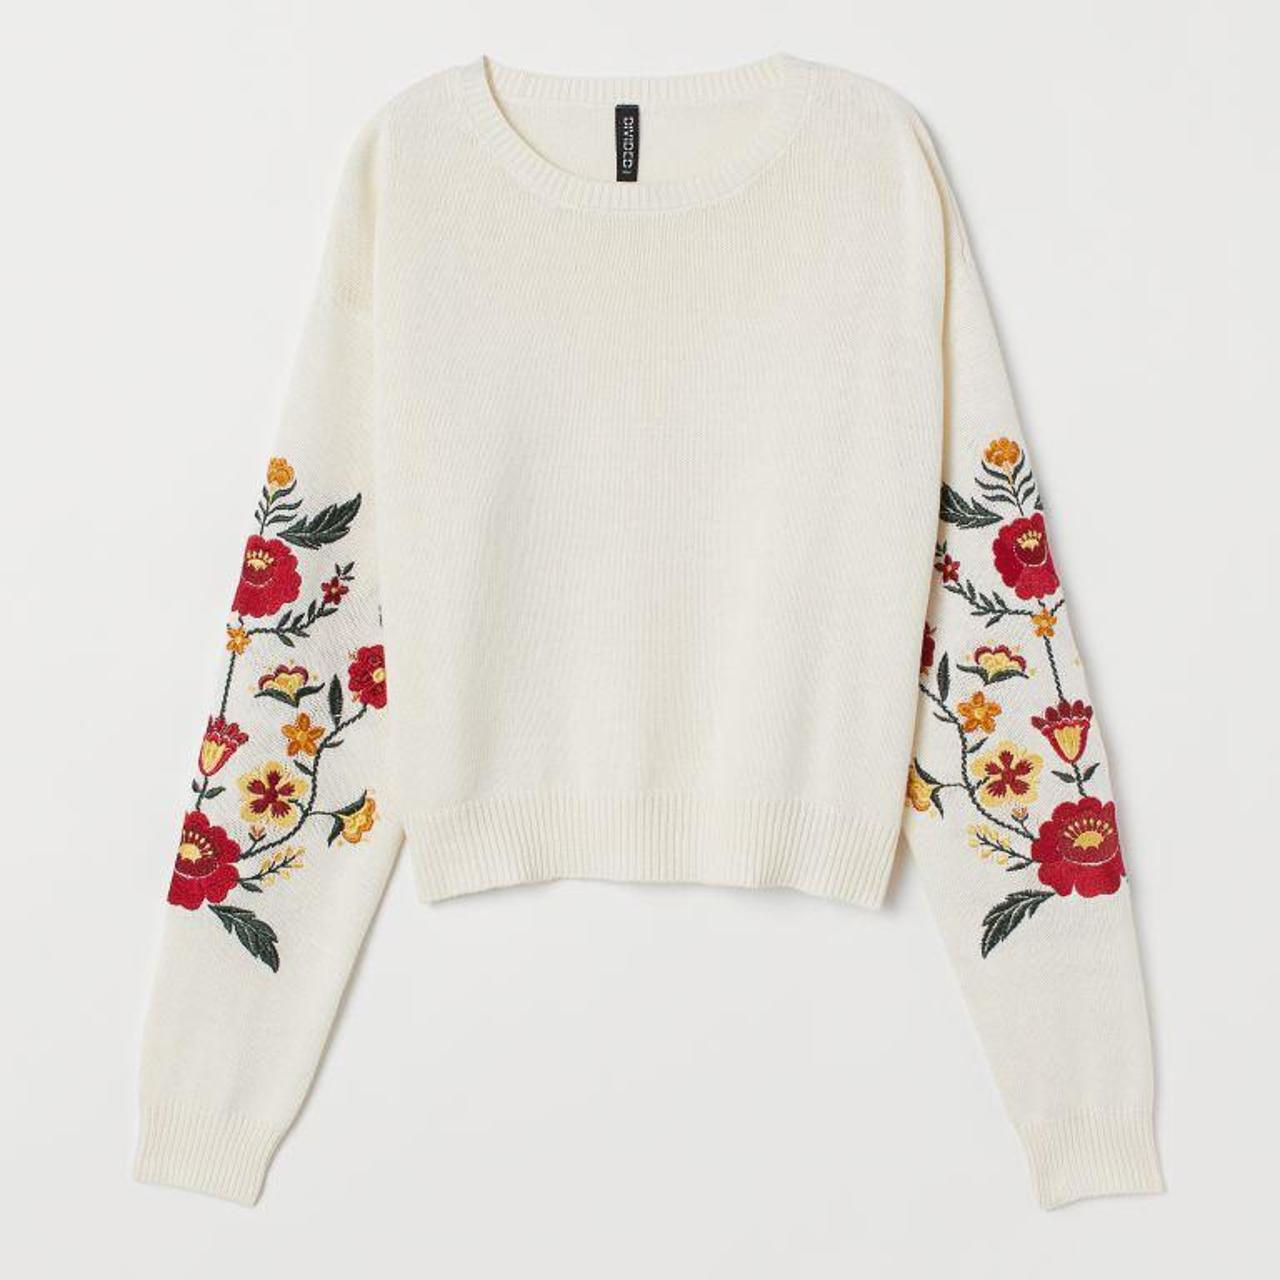 DIVIDED H&M Sweater floral embroidered... - Depop